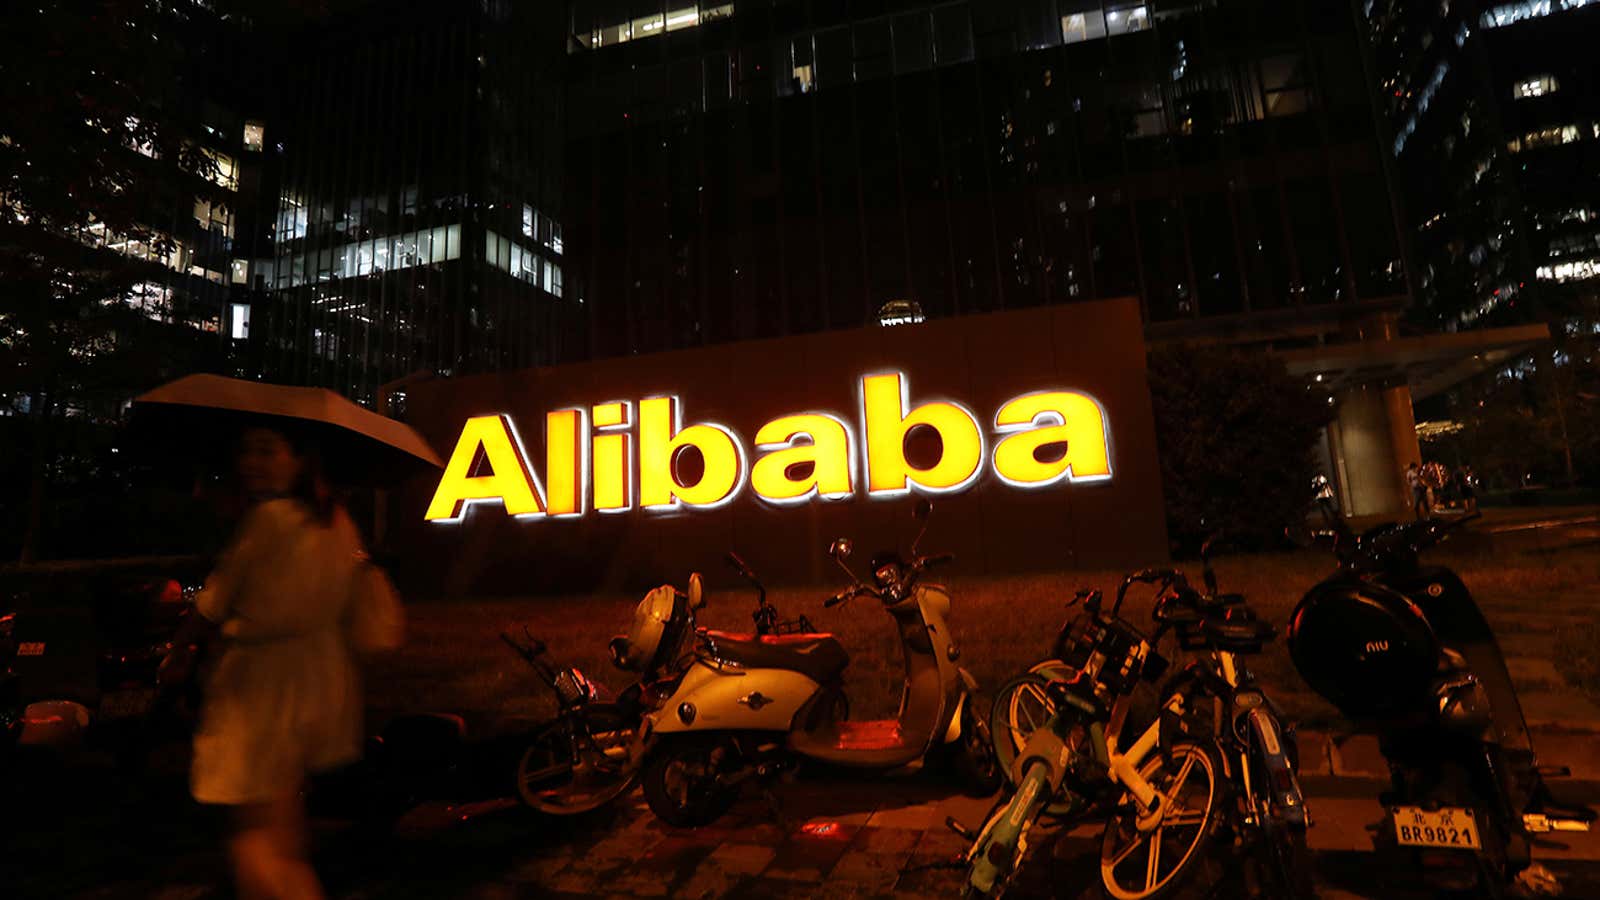 The logo of Alibaba Group is seen lit up at its office building in Beijing, China August 9, 2021. REUTERS/Tingshu Wang